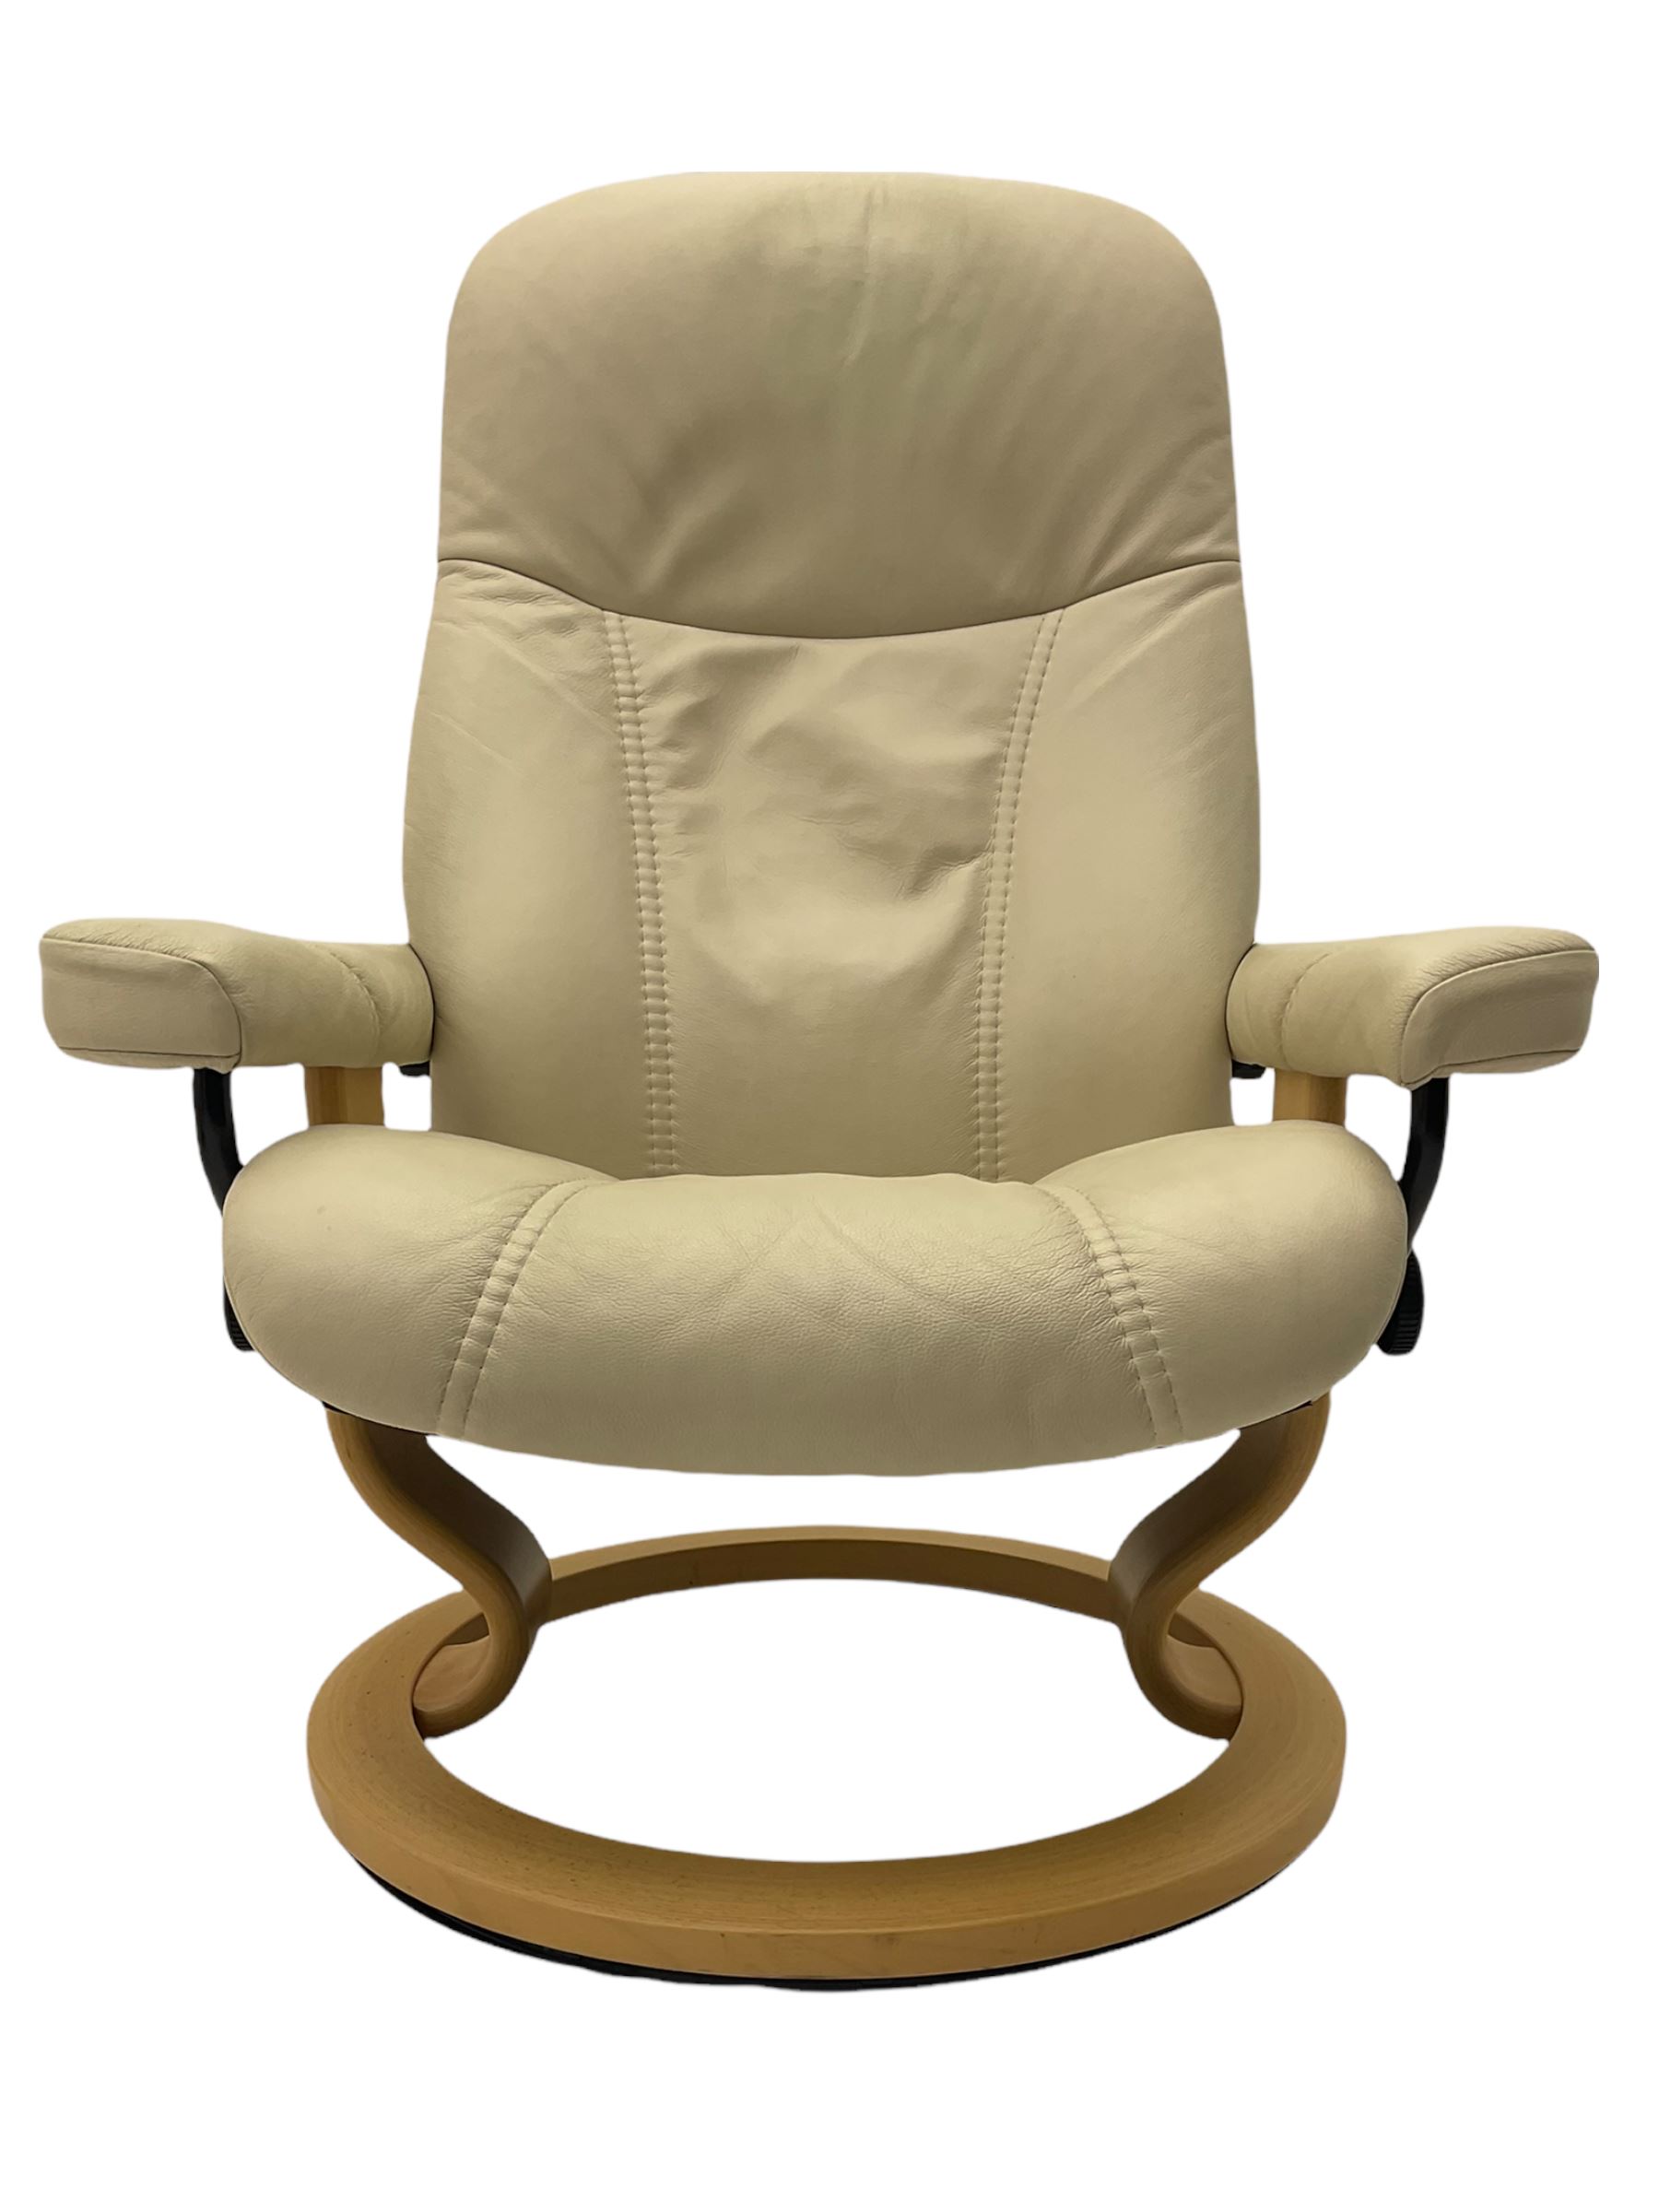 Ekornes - Stressless armchair upholstered in cream leather with matching footstool - Image 2 of 16